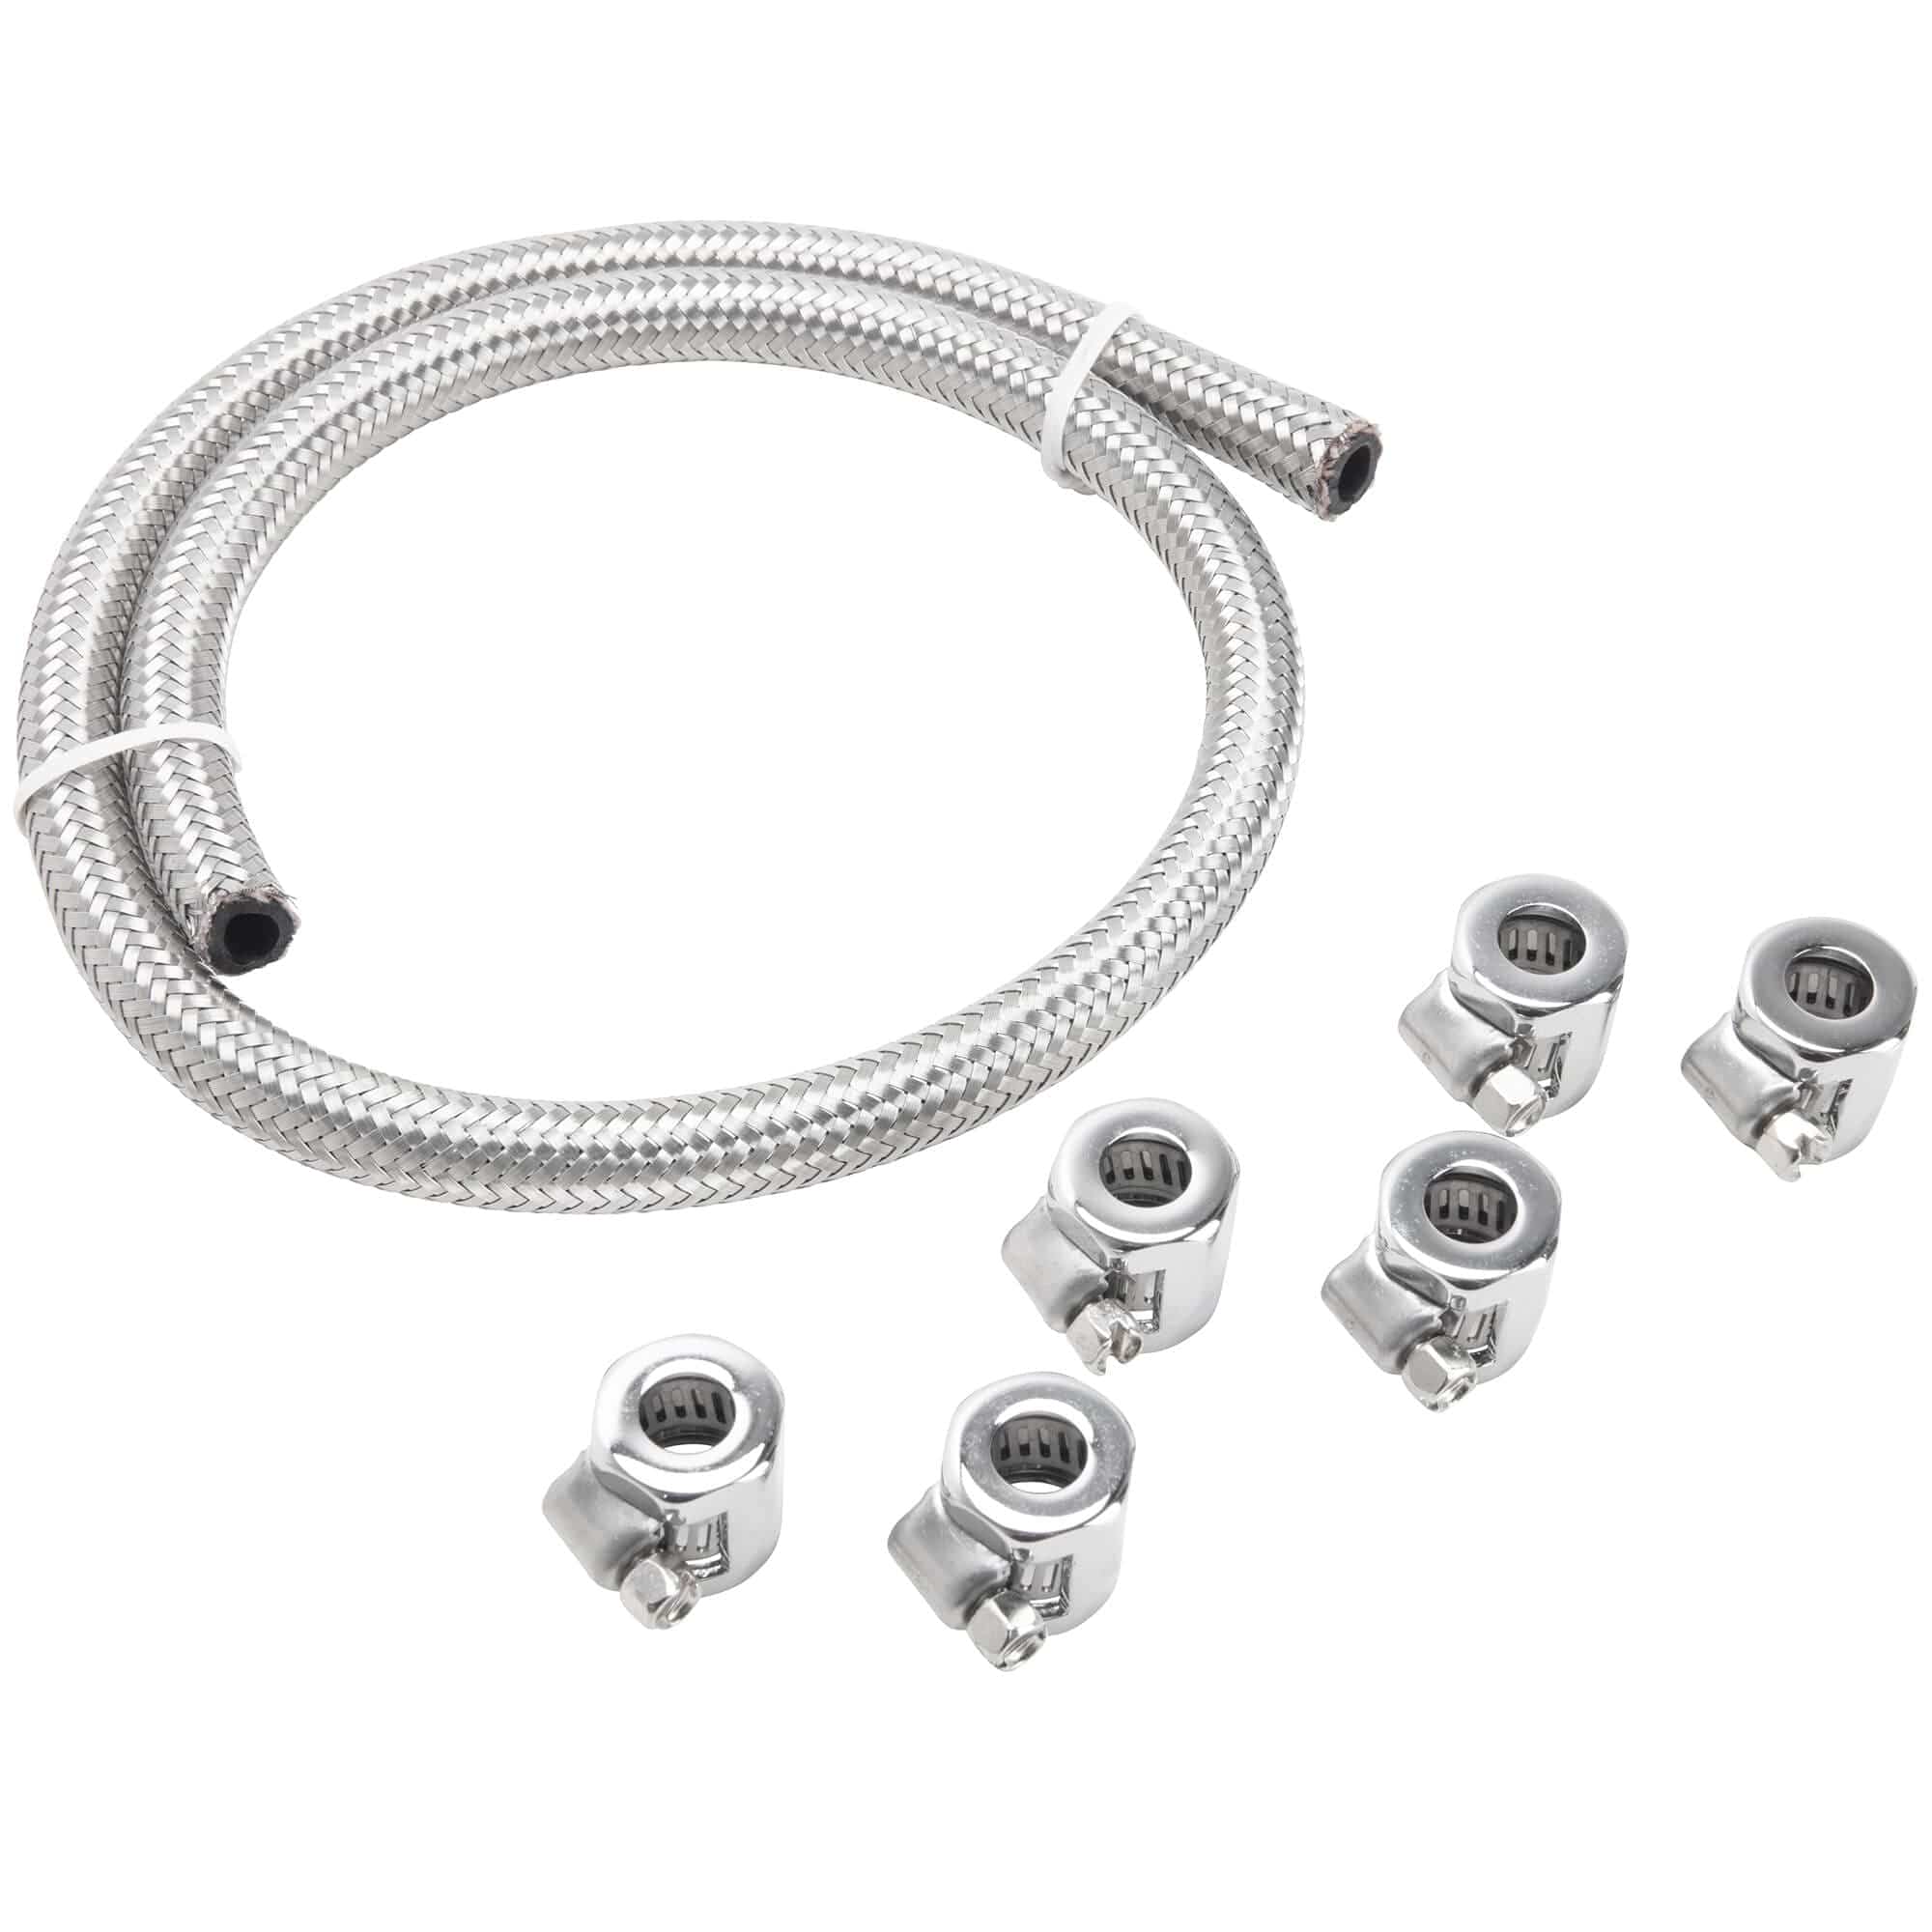 Cycle Standard 1/4 inch Braided Stainless Fuel Line Kit – Lowbrow Customs